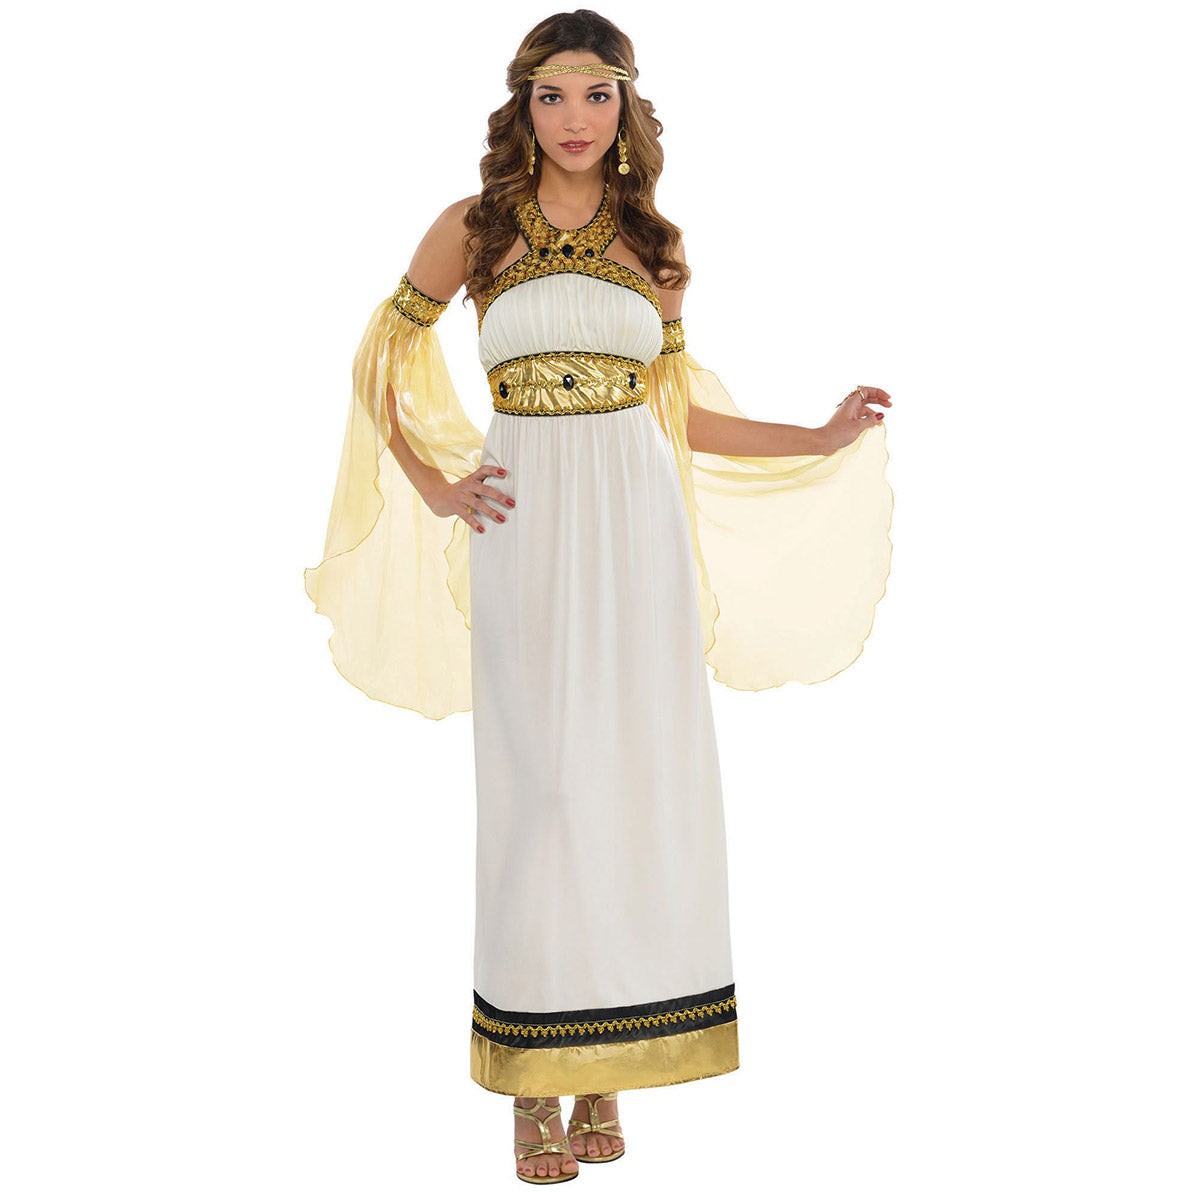 SUIT YOURSELF COSTUME CO. Costumes Divine Goddess Costume for Adults